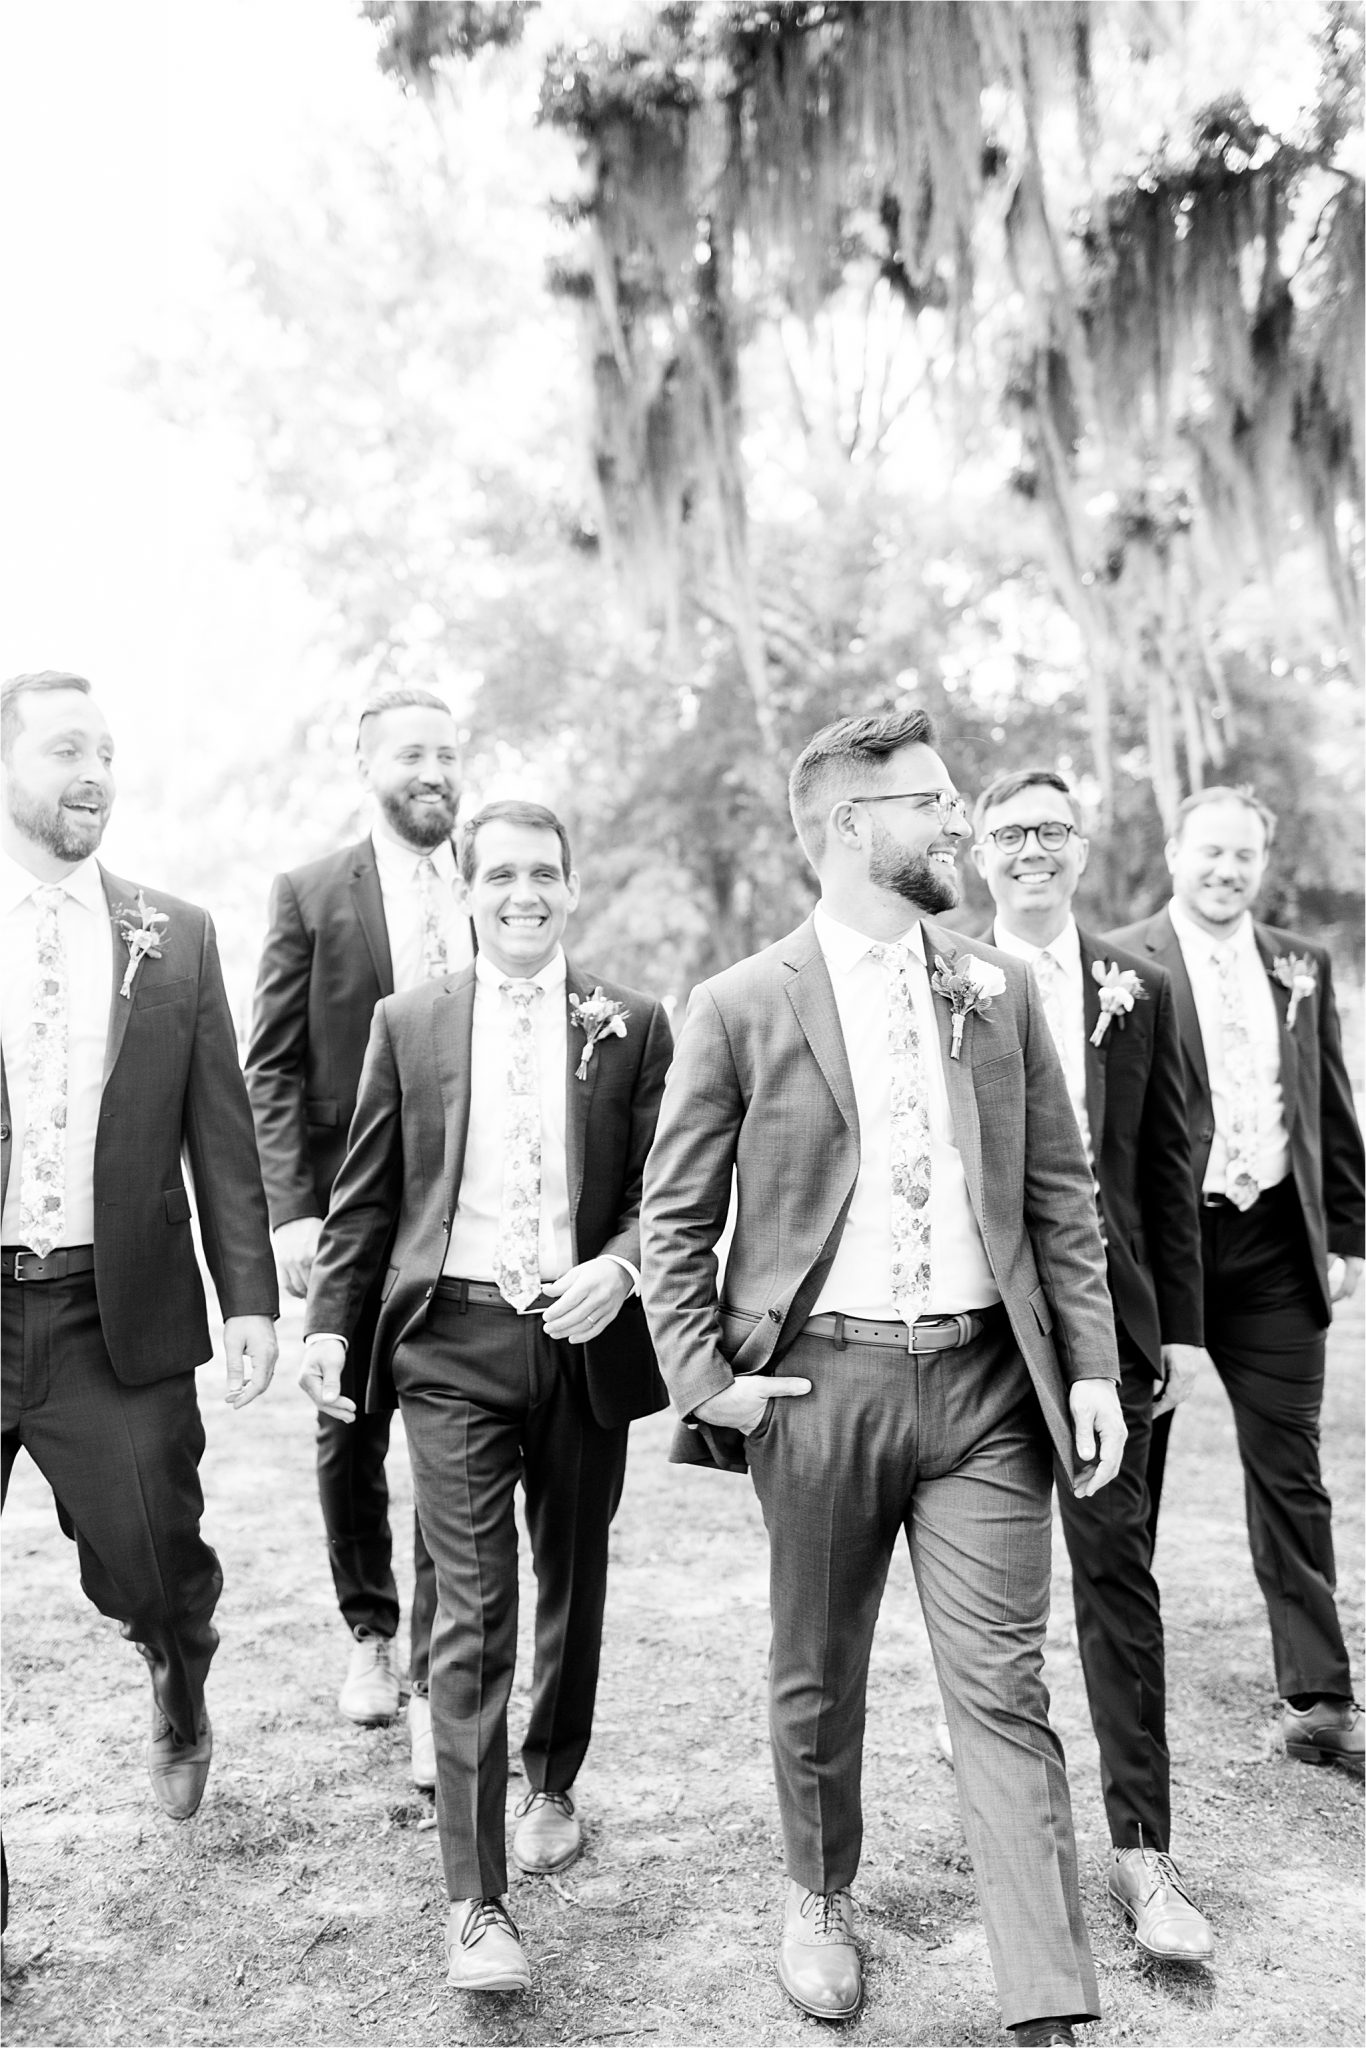 Pastel Themed Wedding-The Chapel at the Waters-Montgomery Alabama Photographer-Miles & Meredyth-Blue Themed Wedding-Alabama Wedding Venue-Grooms Tuxedo-Grooms Tie-Groomsmen 